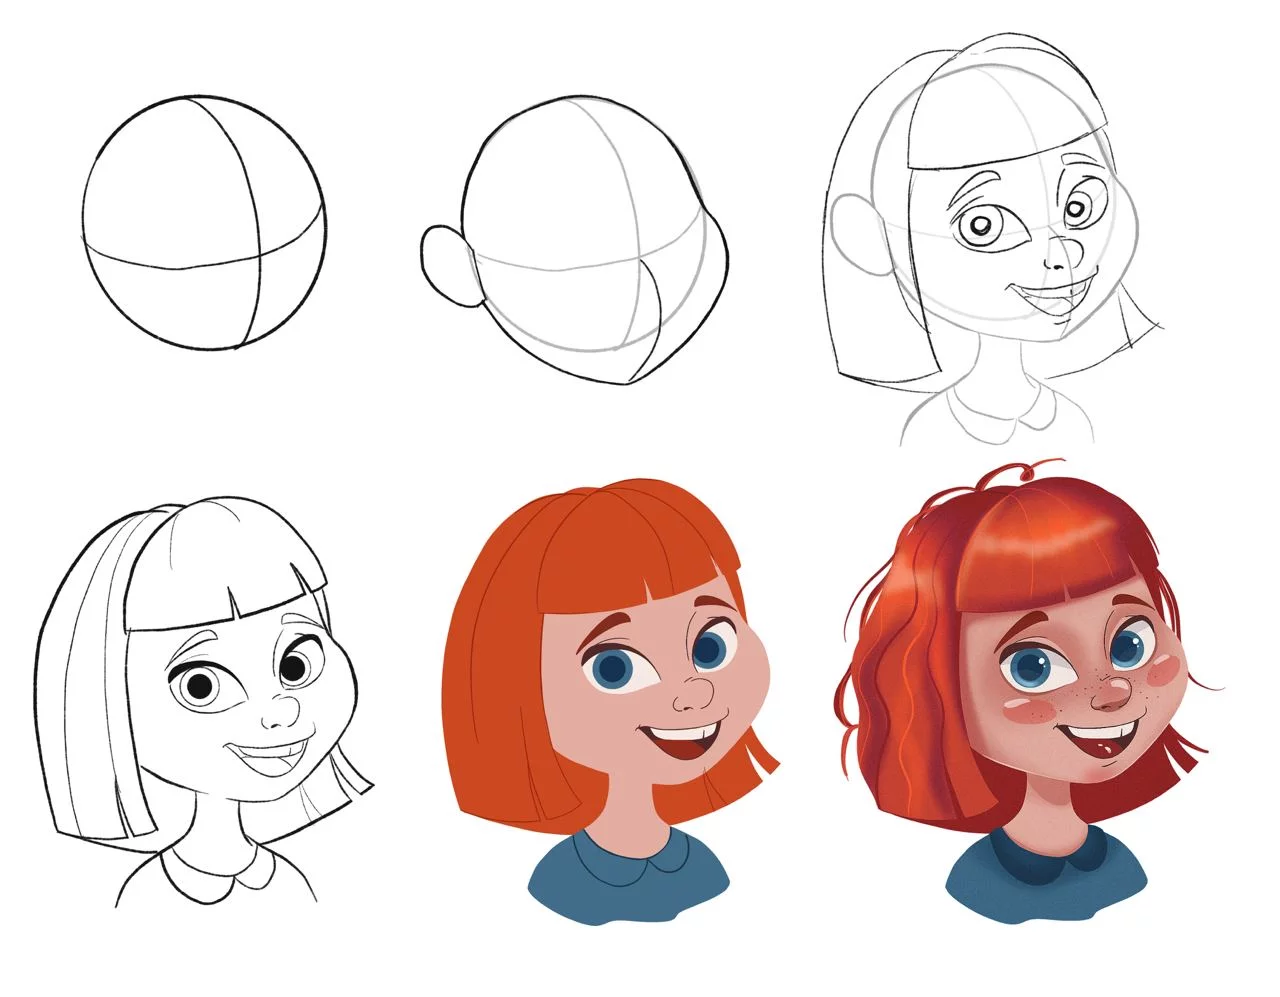 How to Draw Cartoon Characters from Scratch